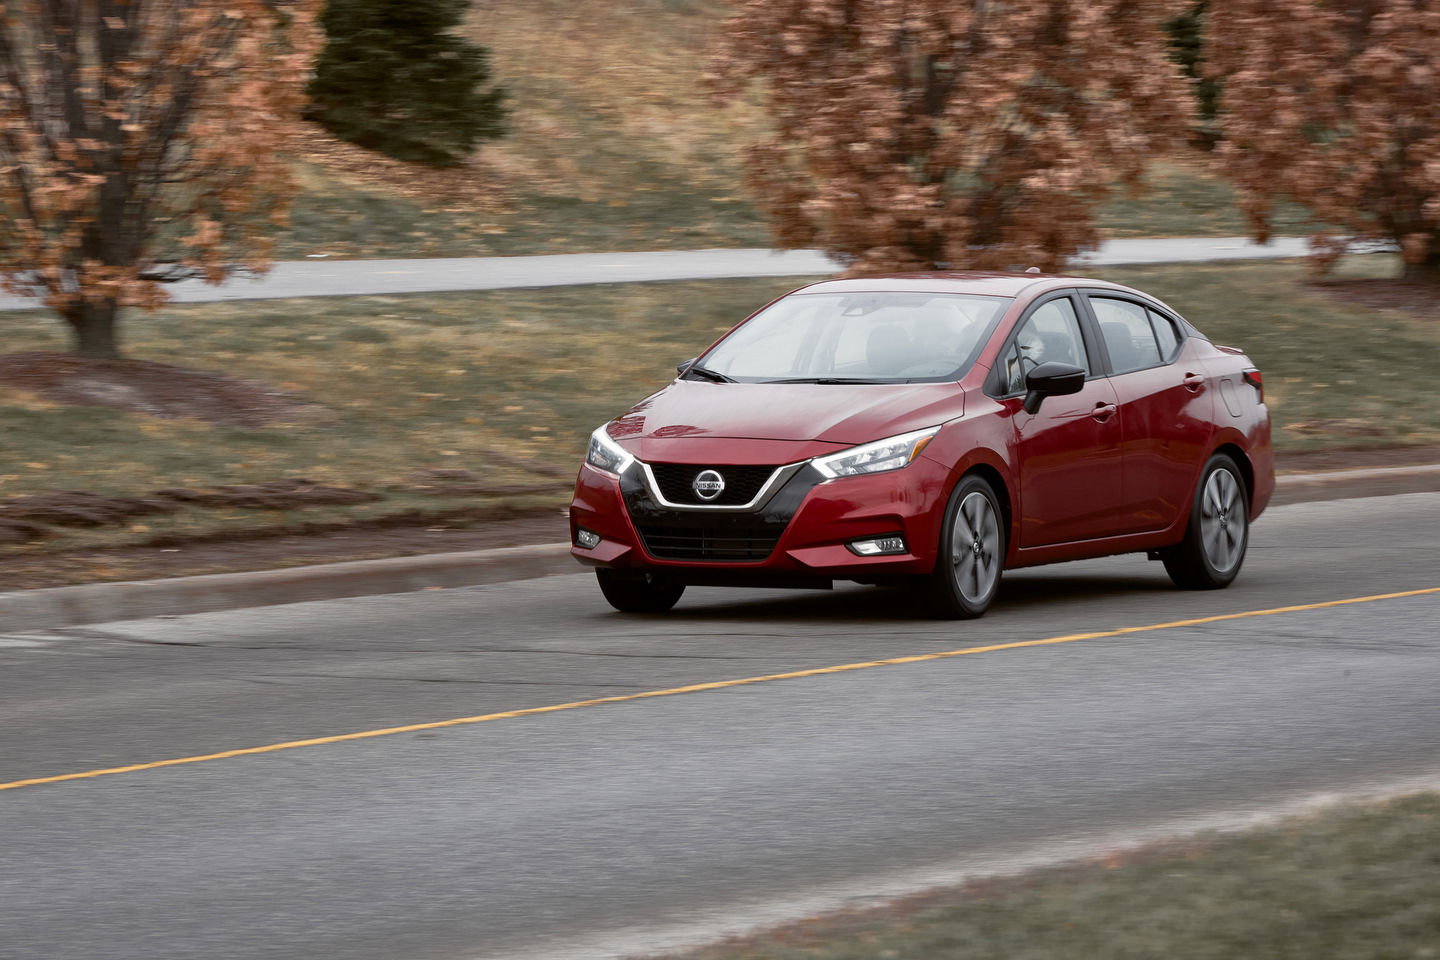 Three pre-owned Nissan vehicles that are perfect for business owners who are starting out